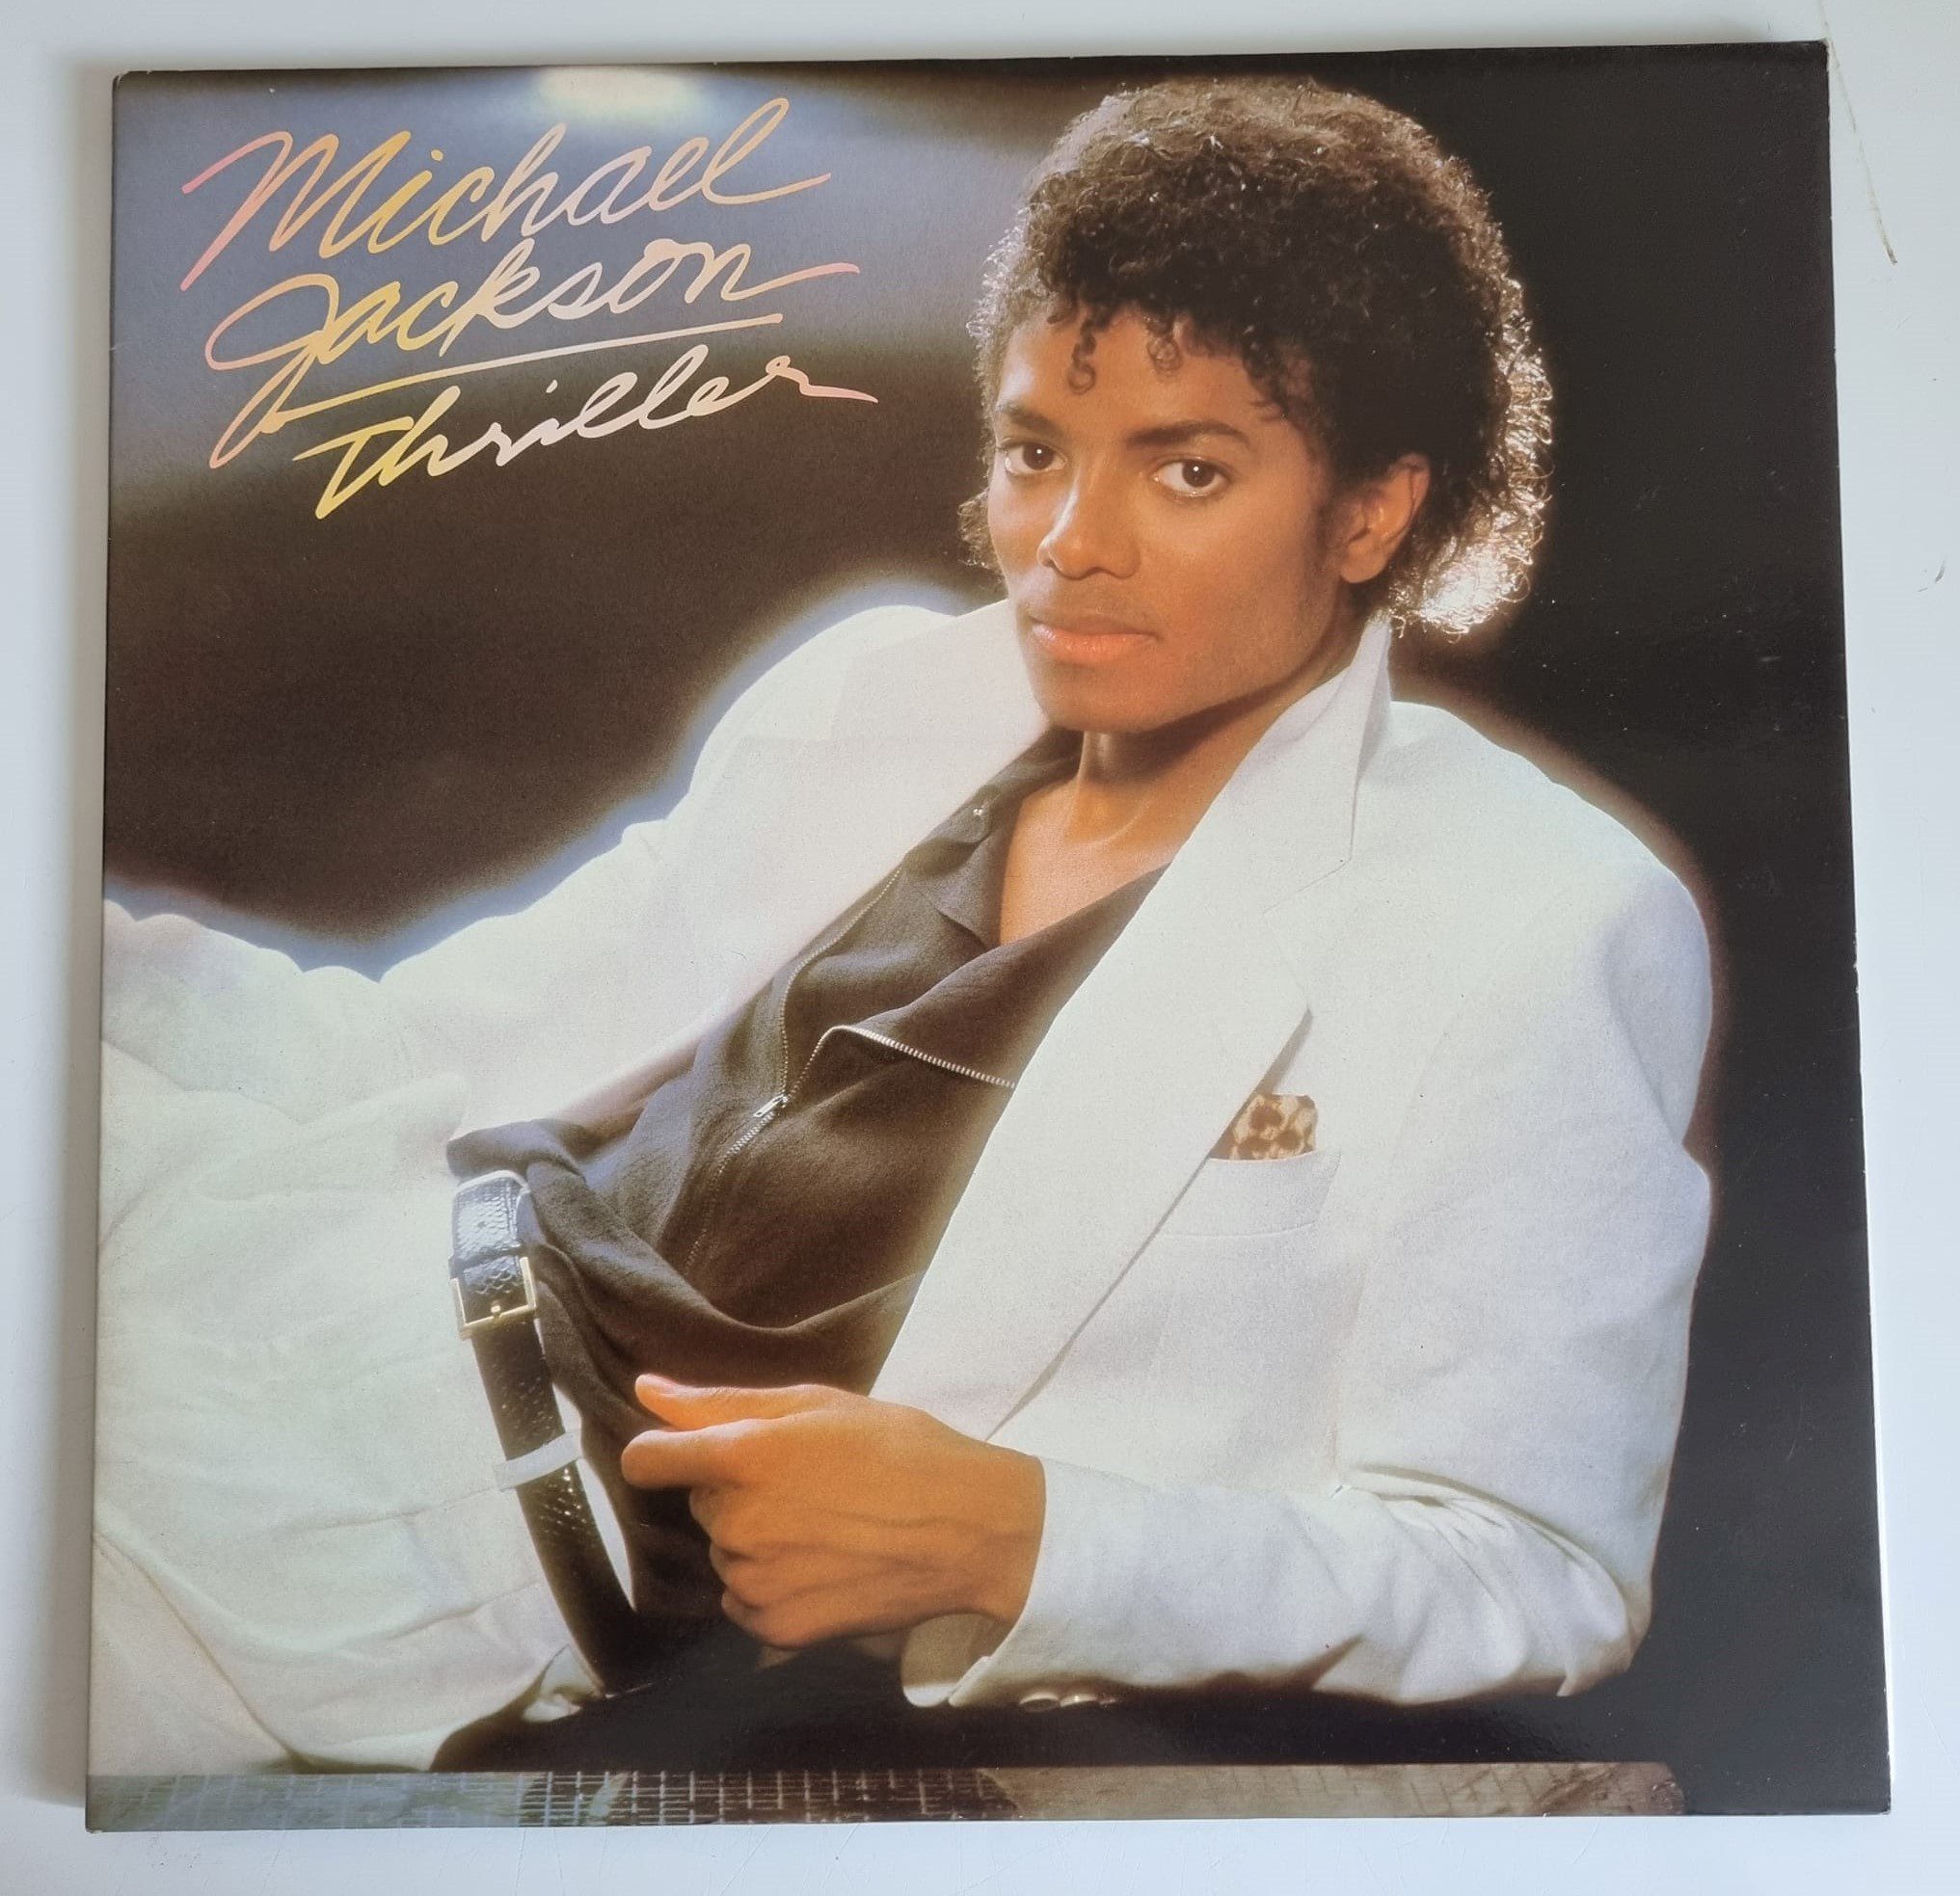 Buy this rare Michael Jackson record by clicking here